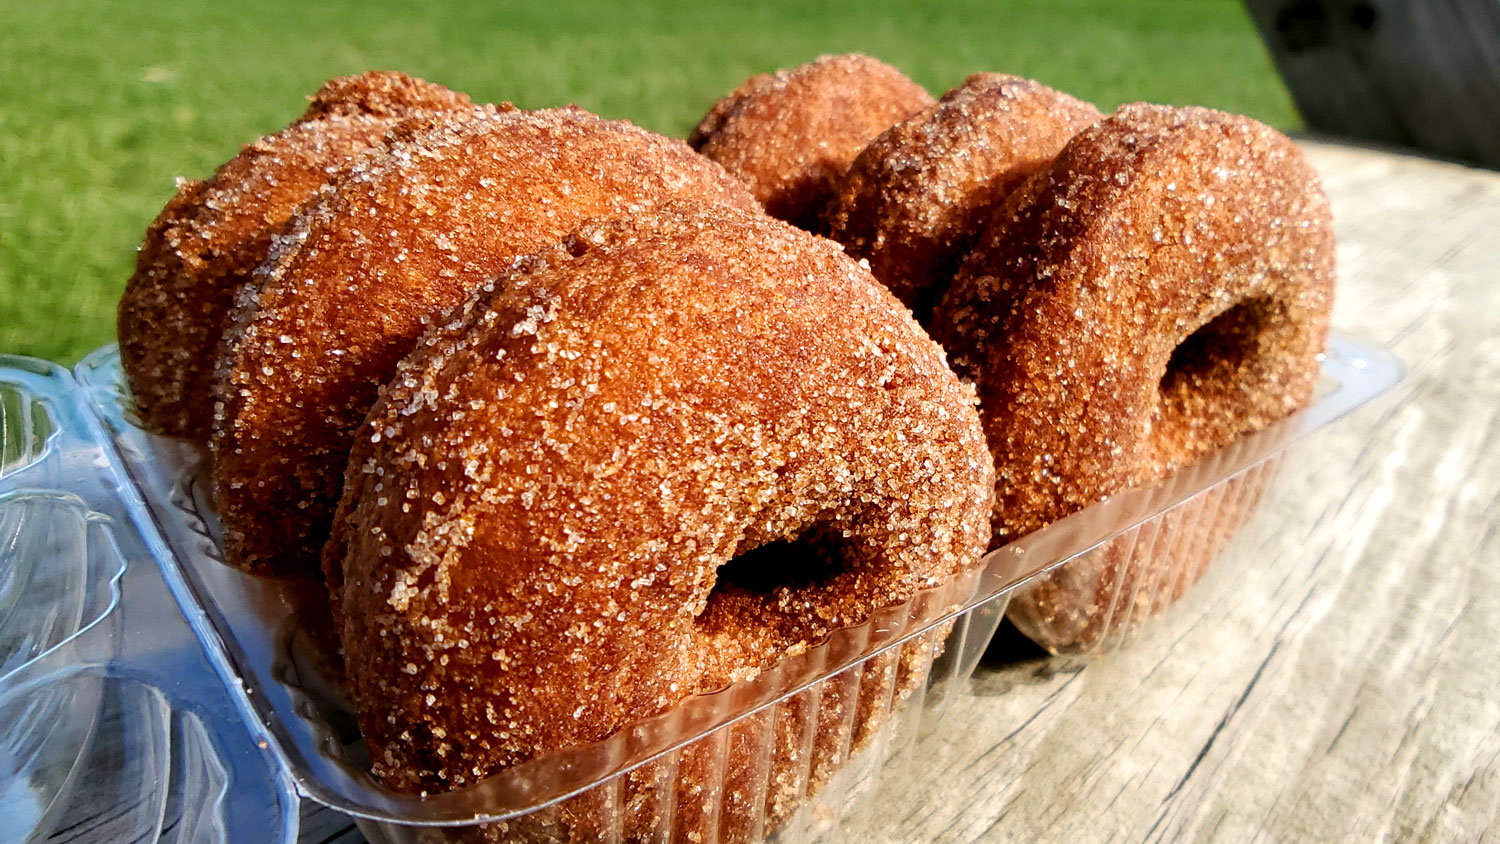 Warm, freshly made apple cider donuts at Cody's Farm and Orchard.